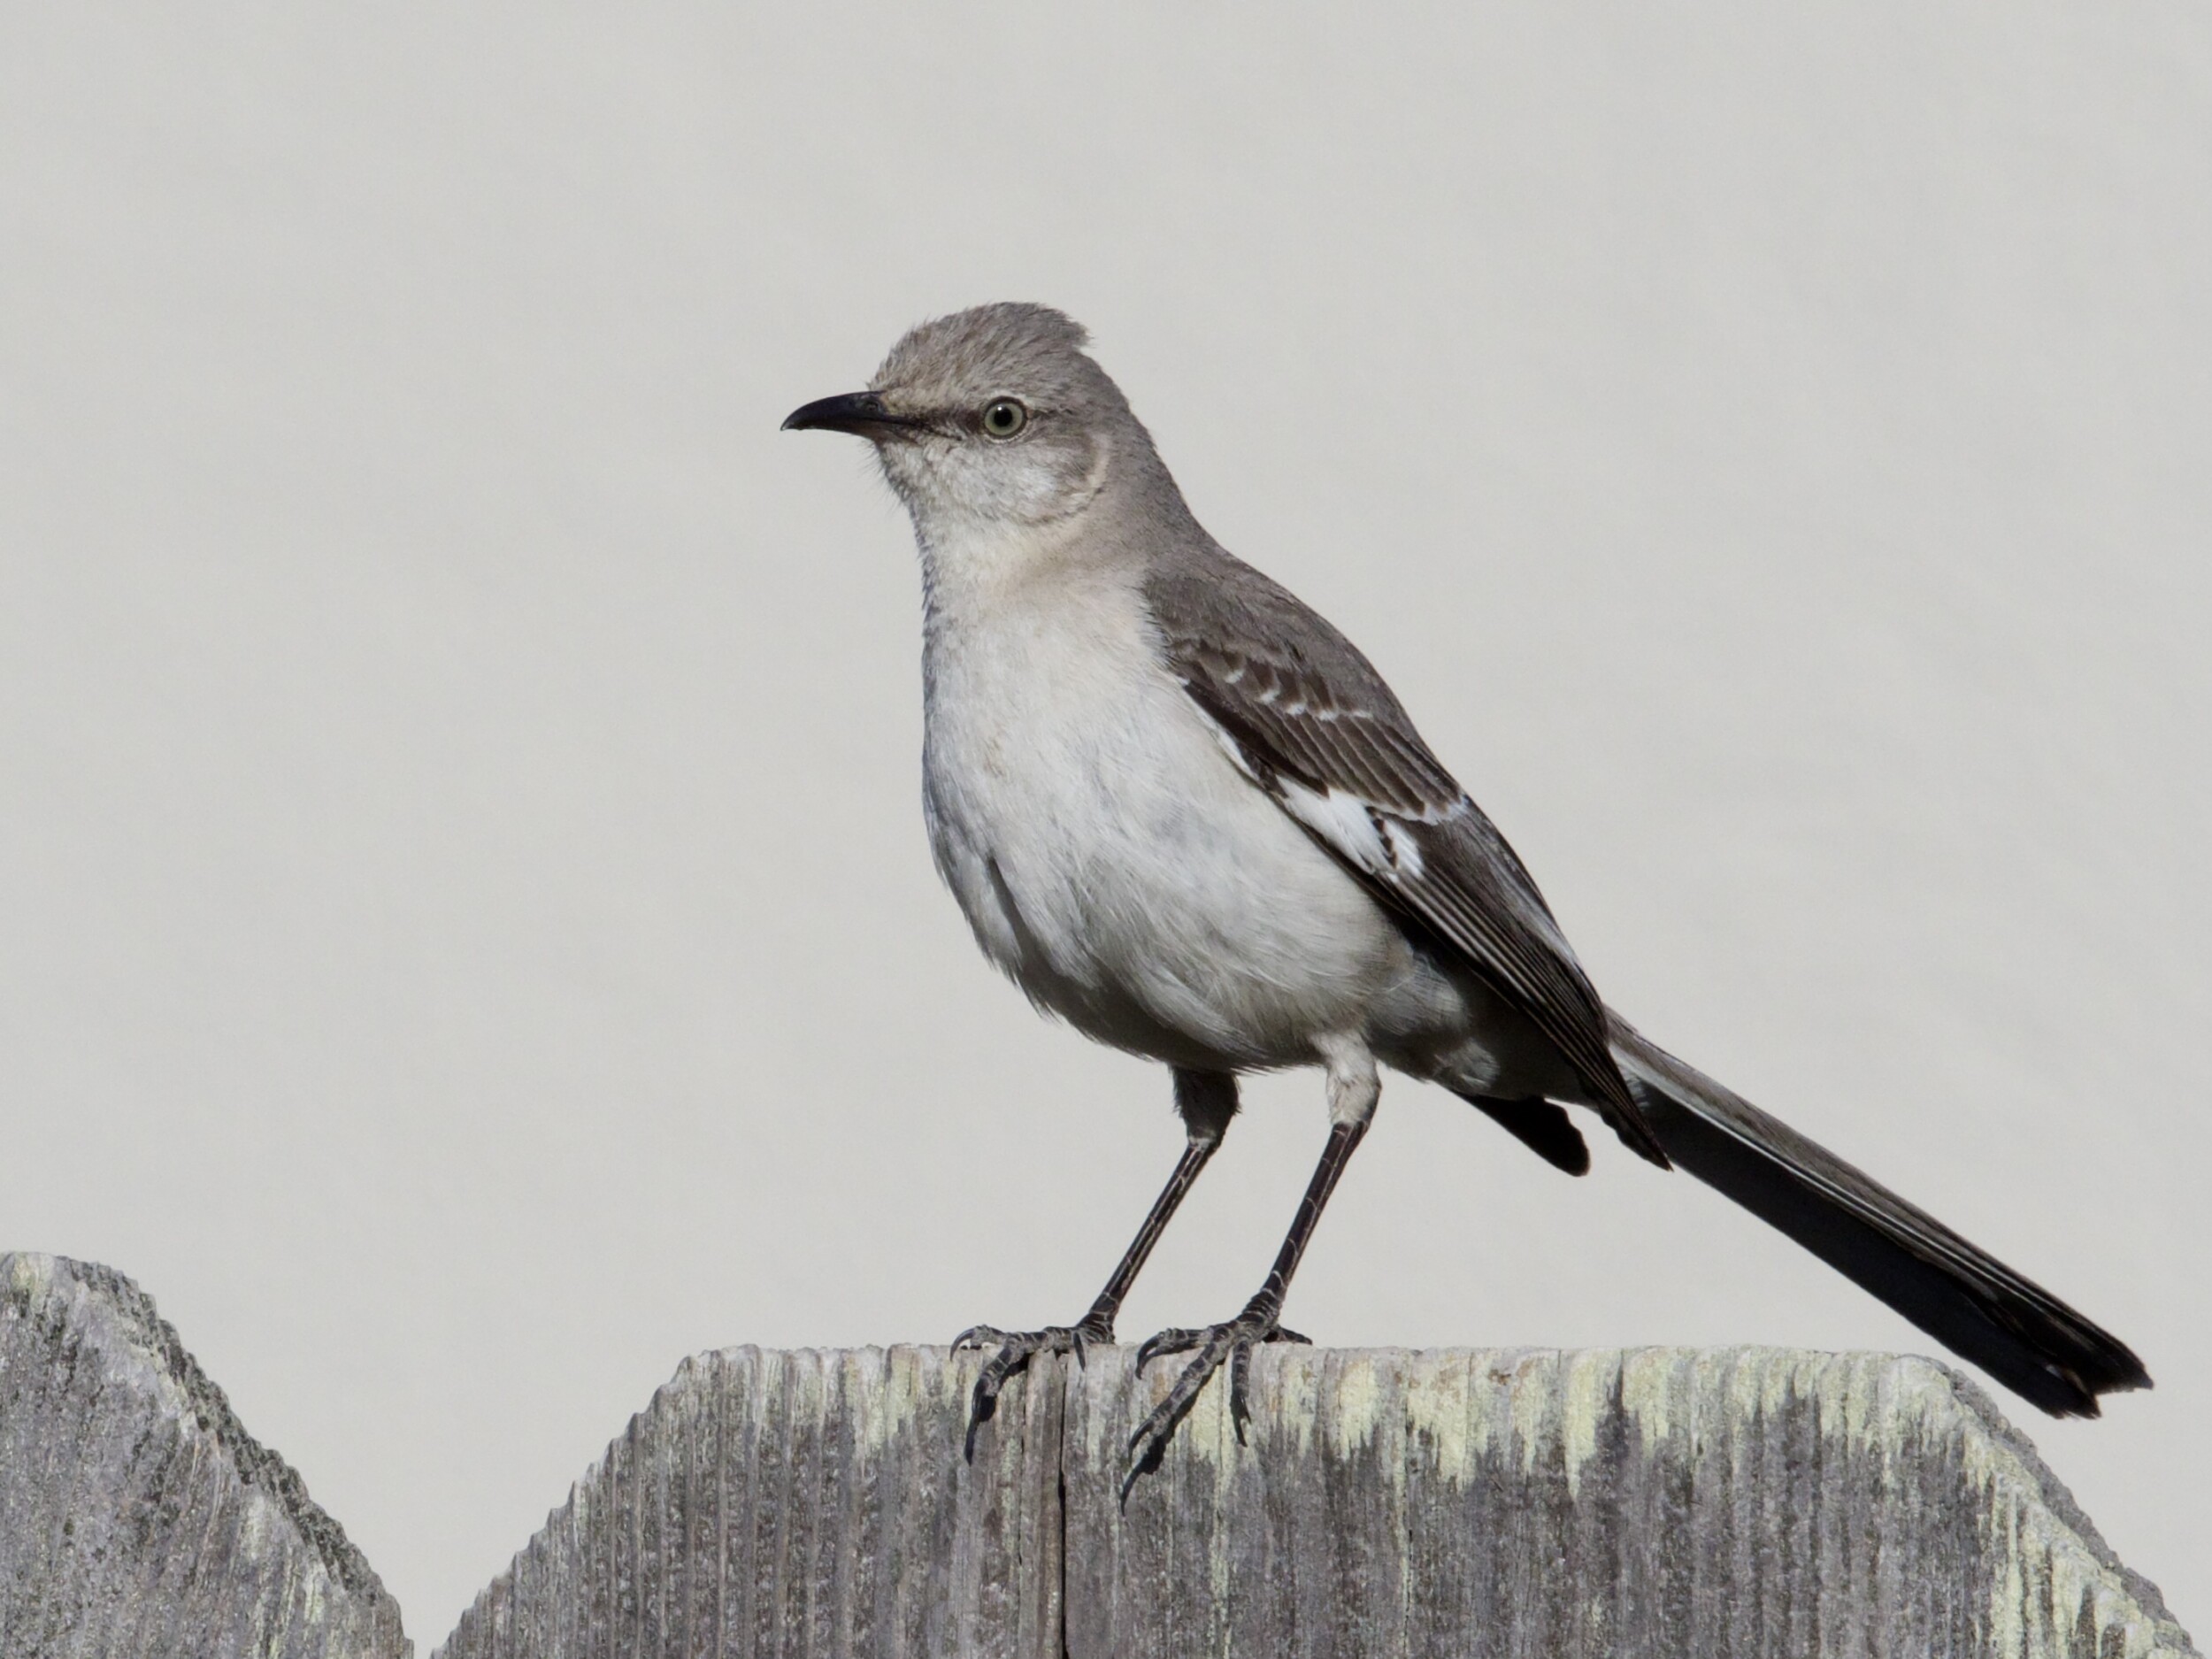 Northern Mockingbird on Fence in Fort Ord